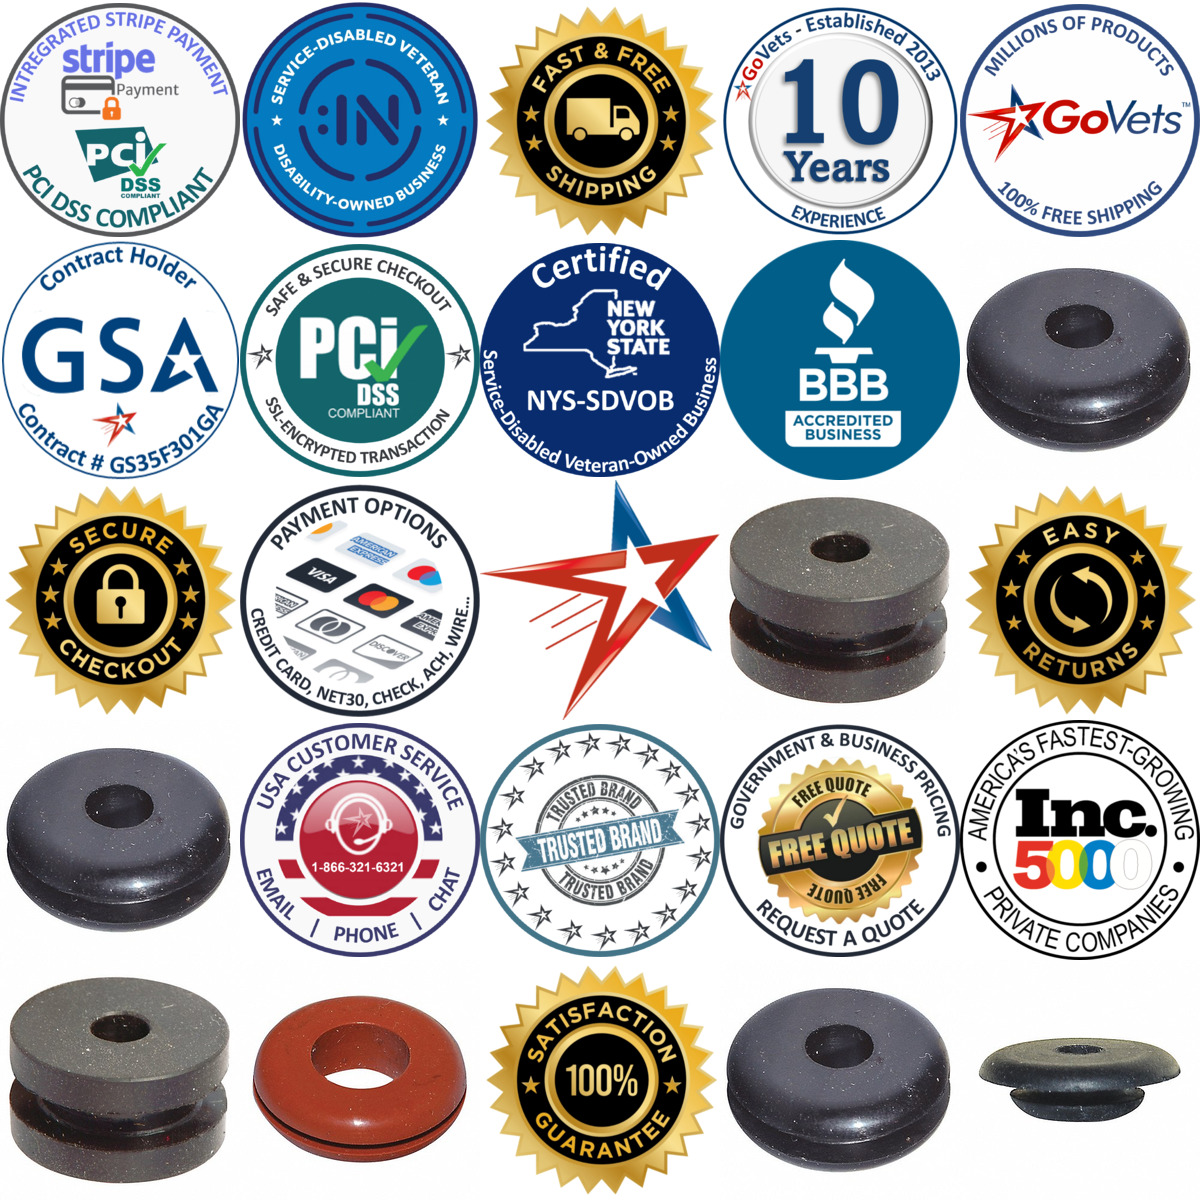 A selection of Rubber Grommets products on GoVets